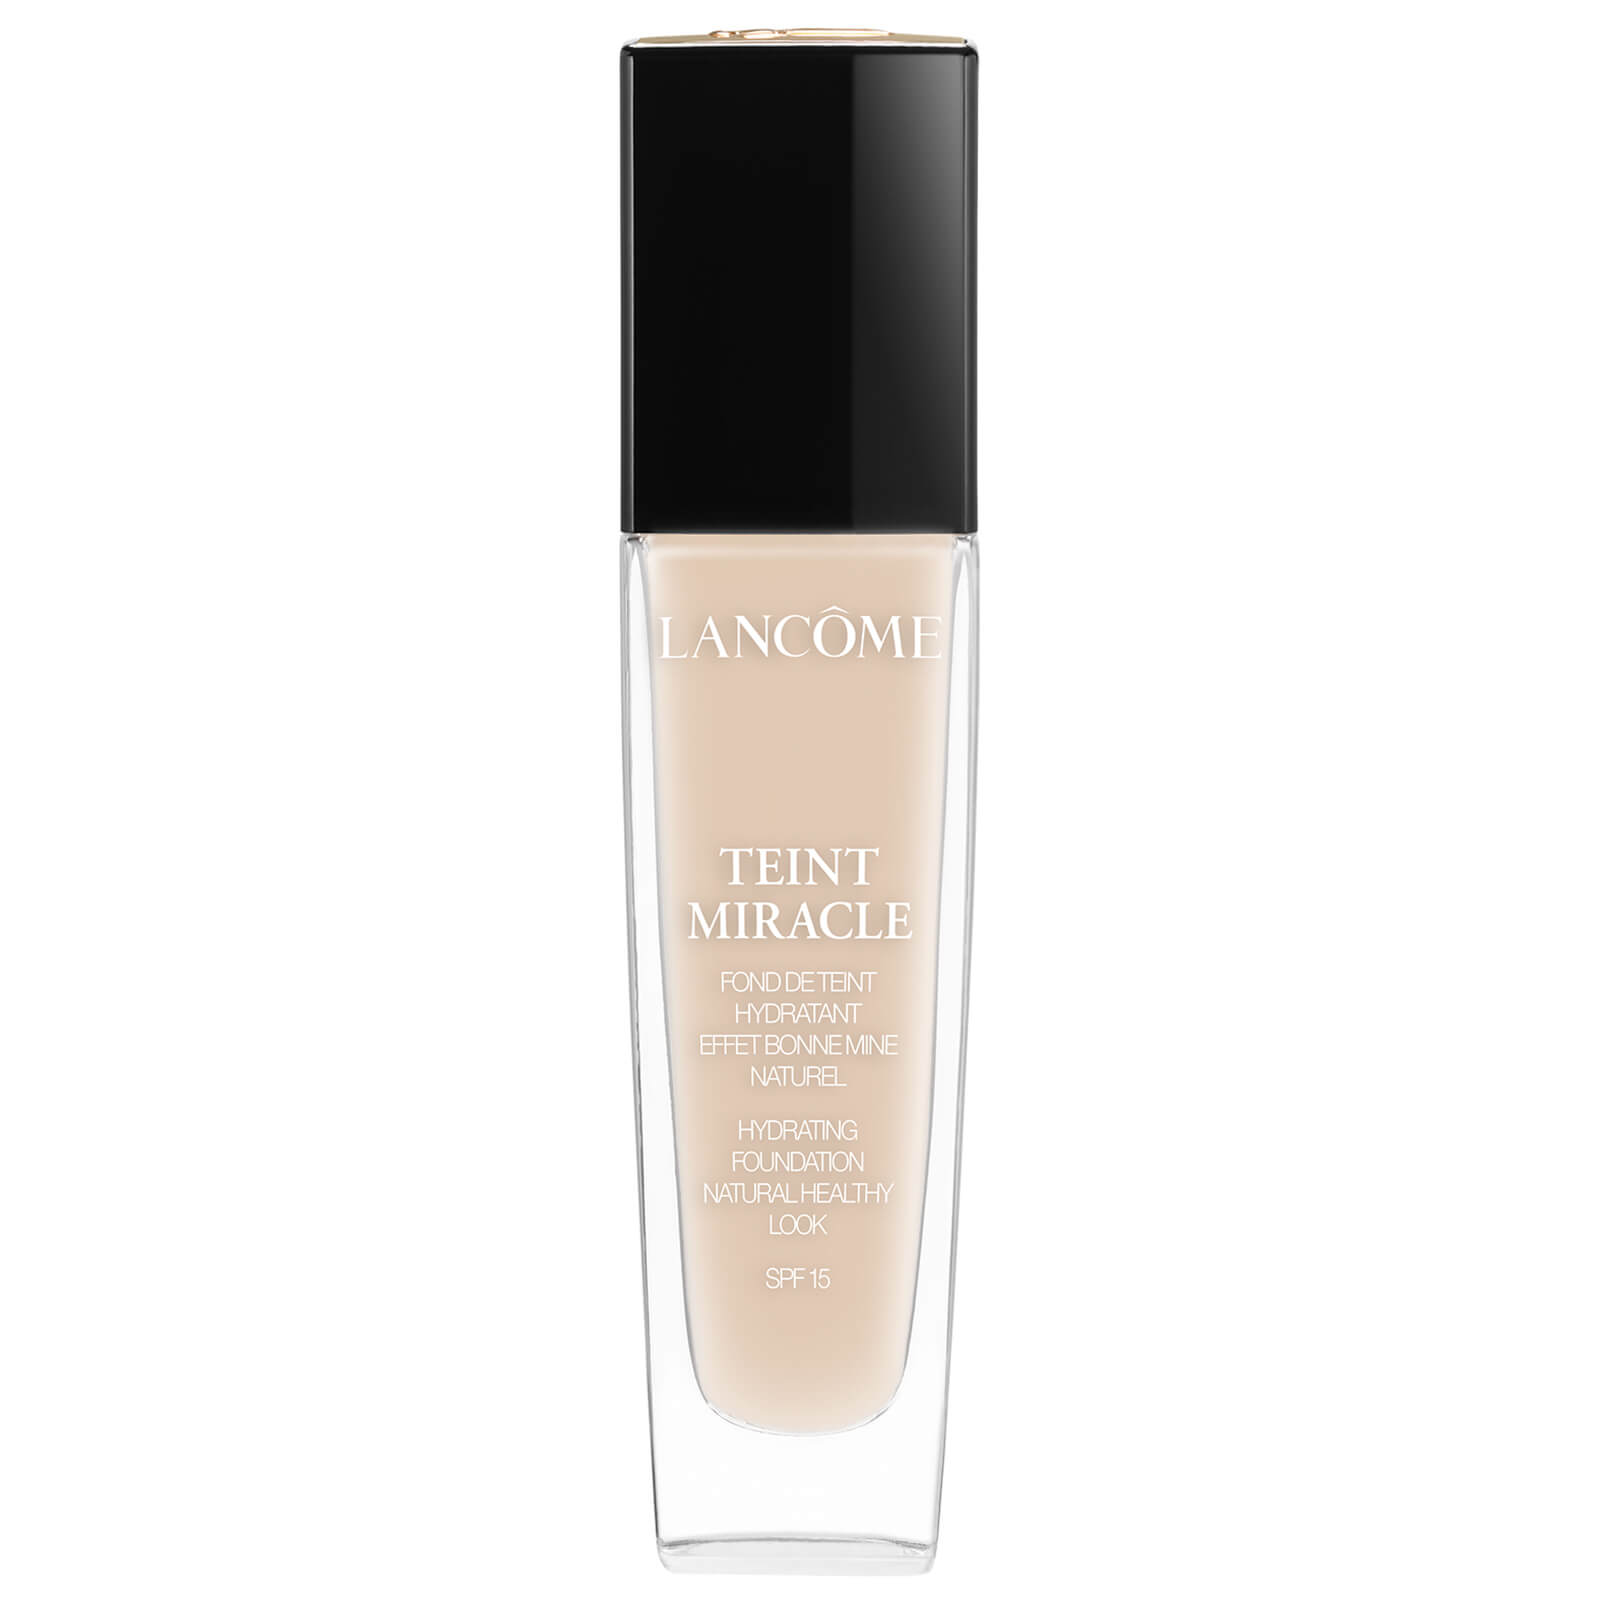 Lancome Teint Miracle Foundation SPF15 30ml - 010 Beige Porcelaine